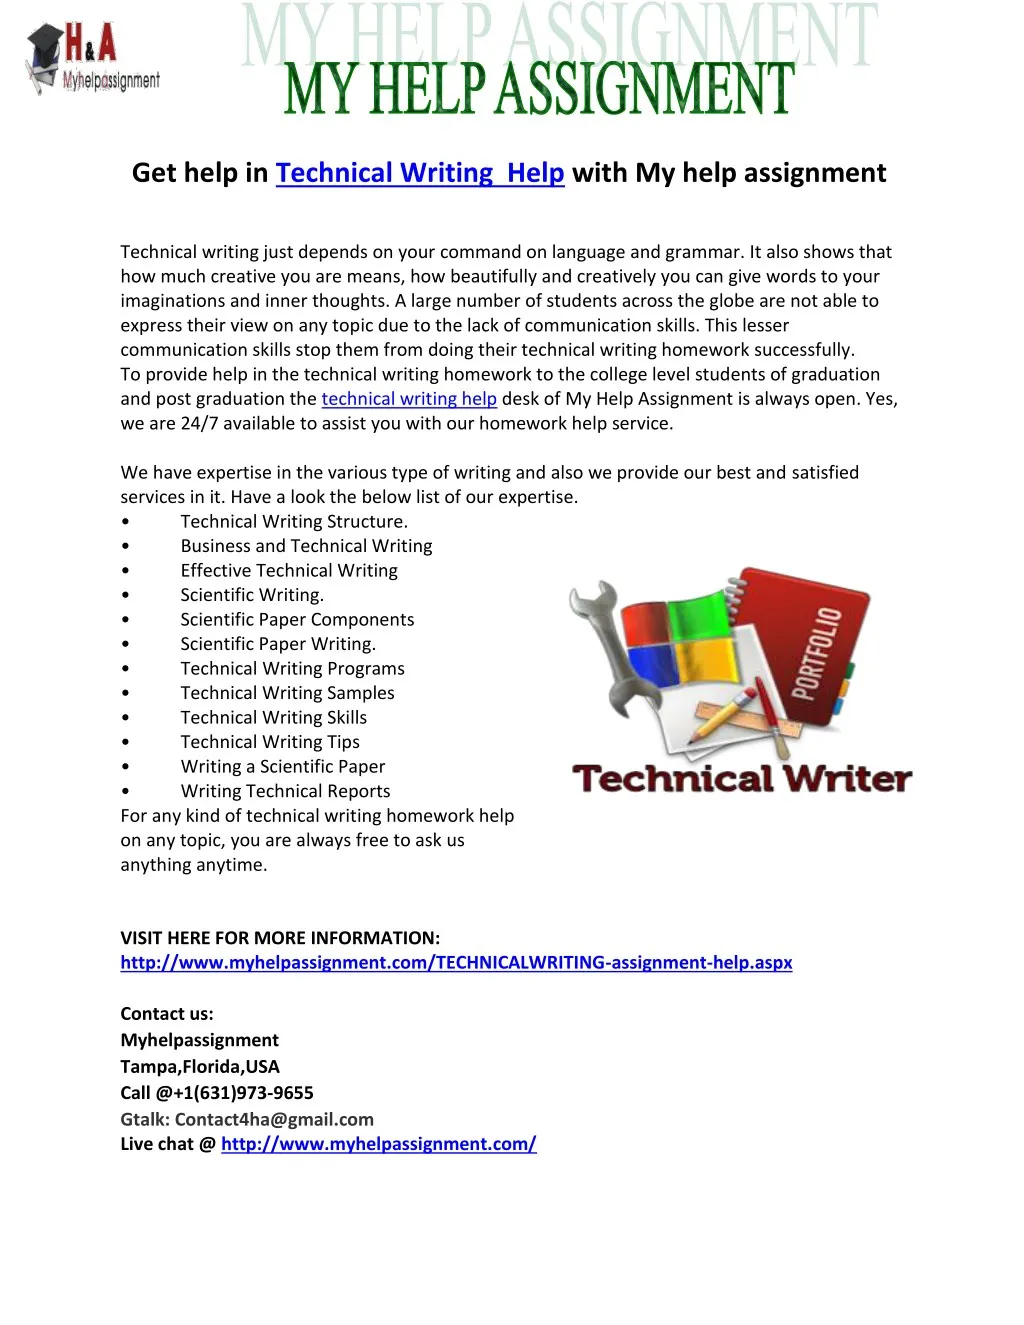 get help in technical writing help with my help